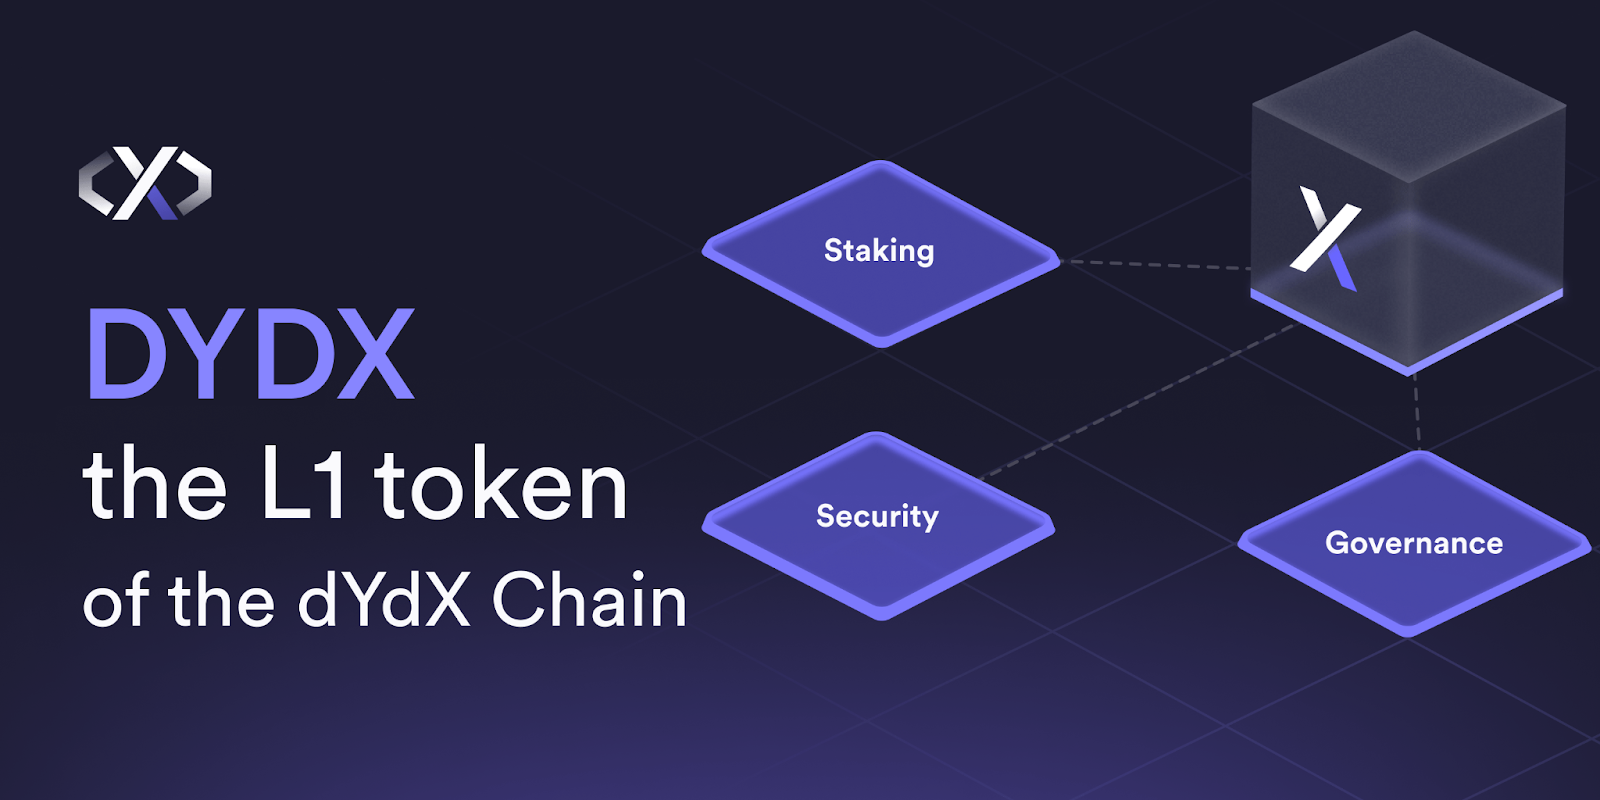 Upon the October 2023 release of the new dYdX Chain last fall, the dYdX community voted to launch a new native DYDX token to replace the initial ethDYX token that was the protocol’s initial unit of value. With this new token launch, the DYDX asset has been given more utility when compared to its predecessor, focusing on staking, security, and governance improvements. (Image Credit: Expanded Utility of DYDX on the dYdX Exchange via the dYdX blog)